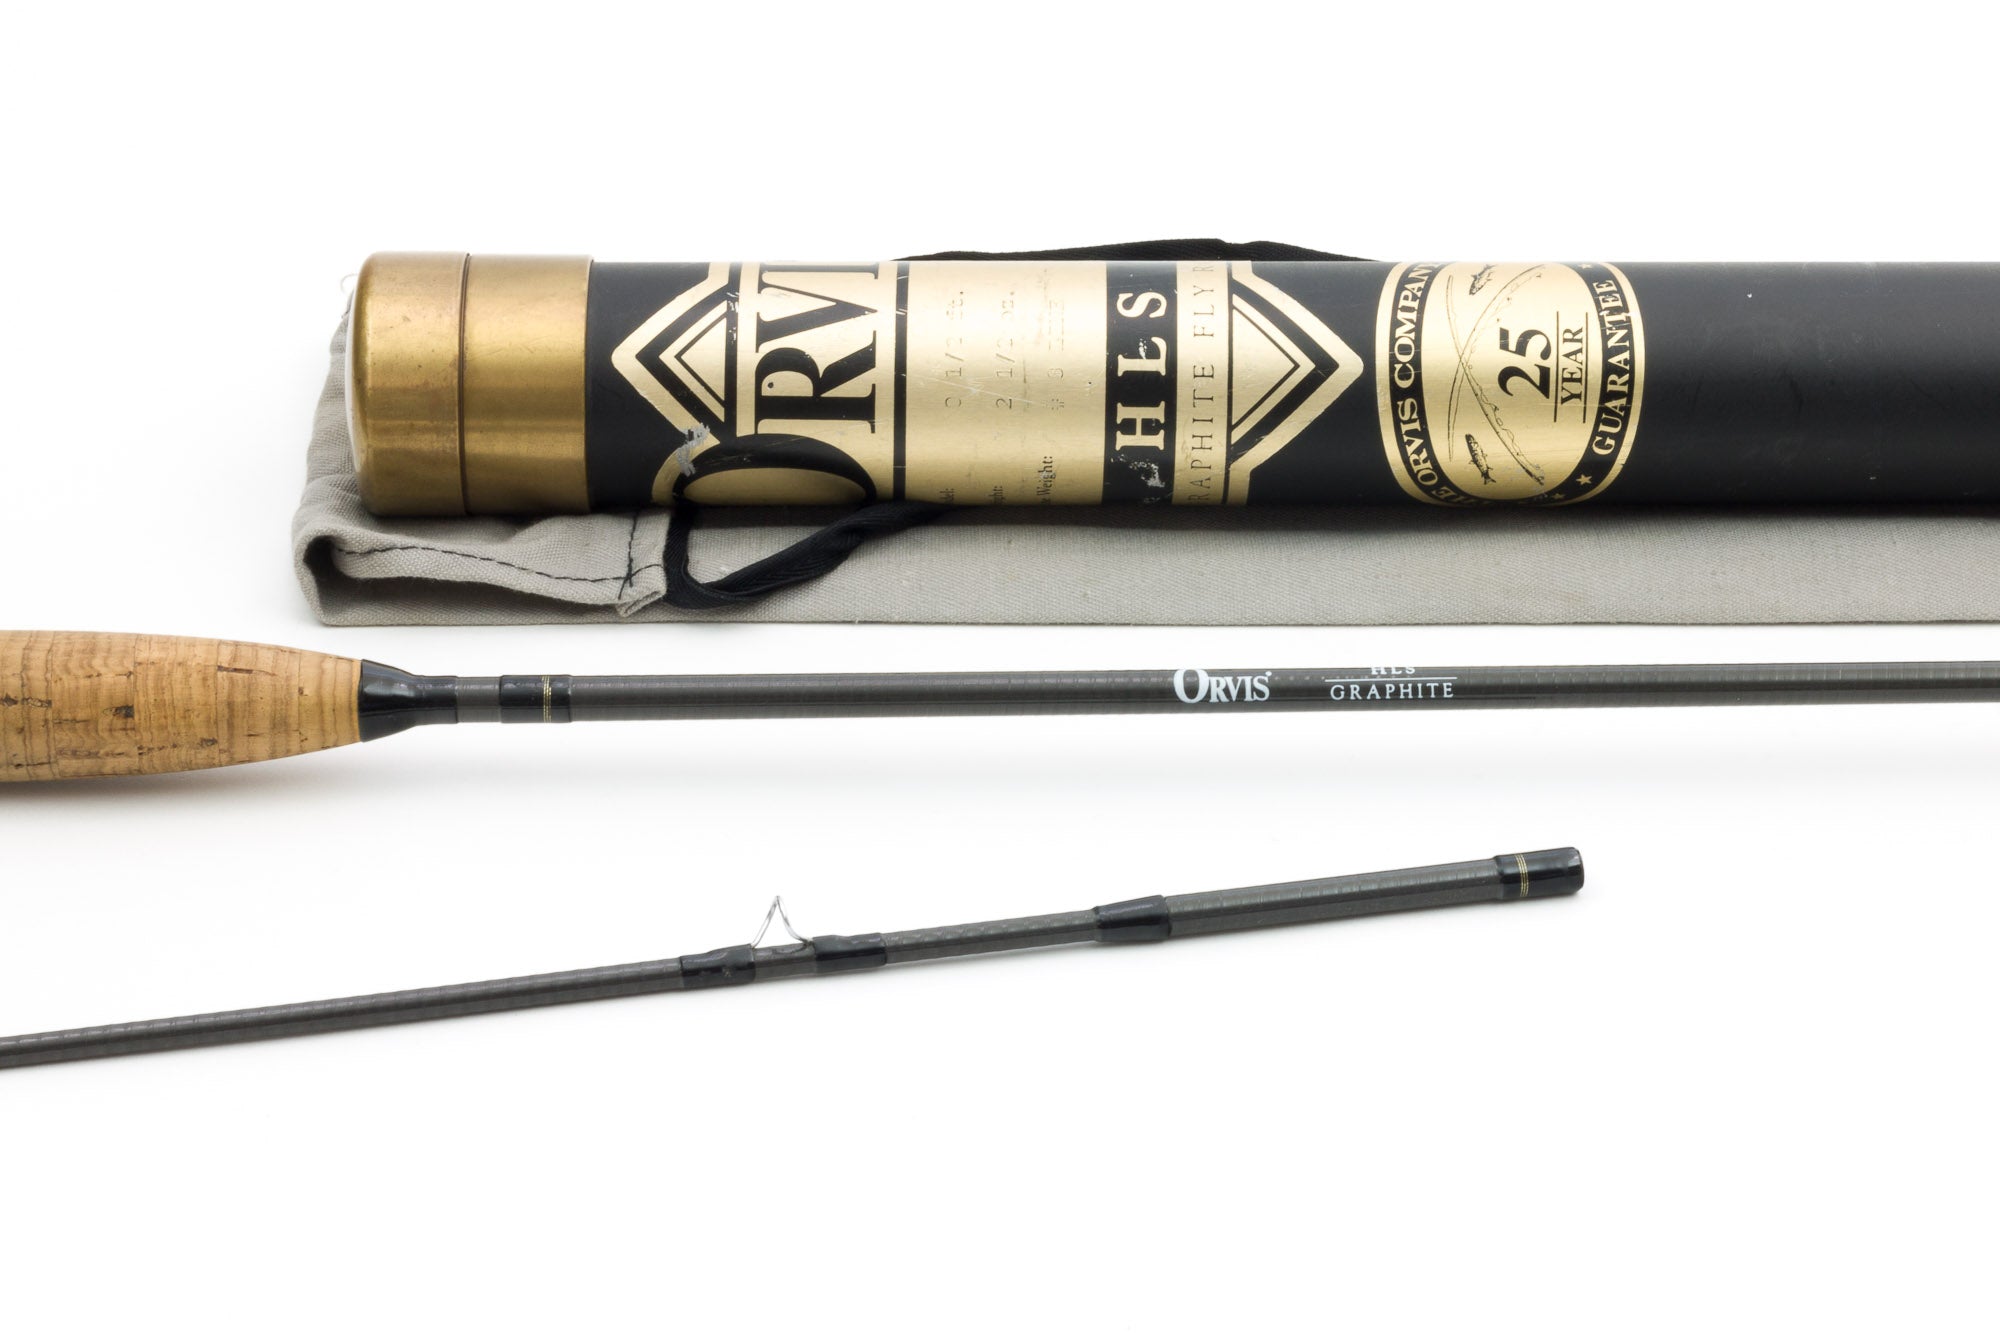 Orvis - HLS 8'6 2-piece 3wt Graphite Fly Rod